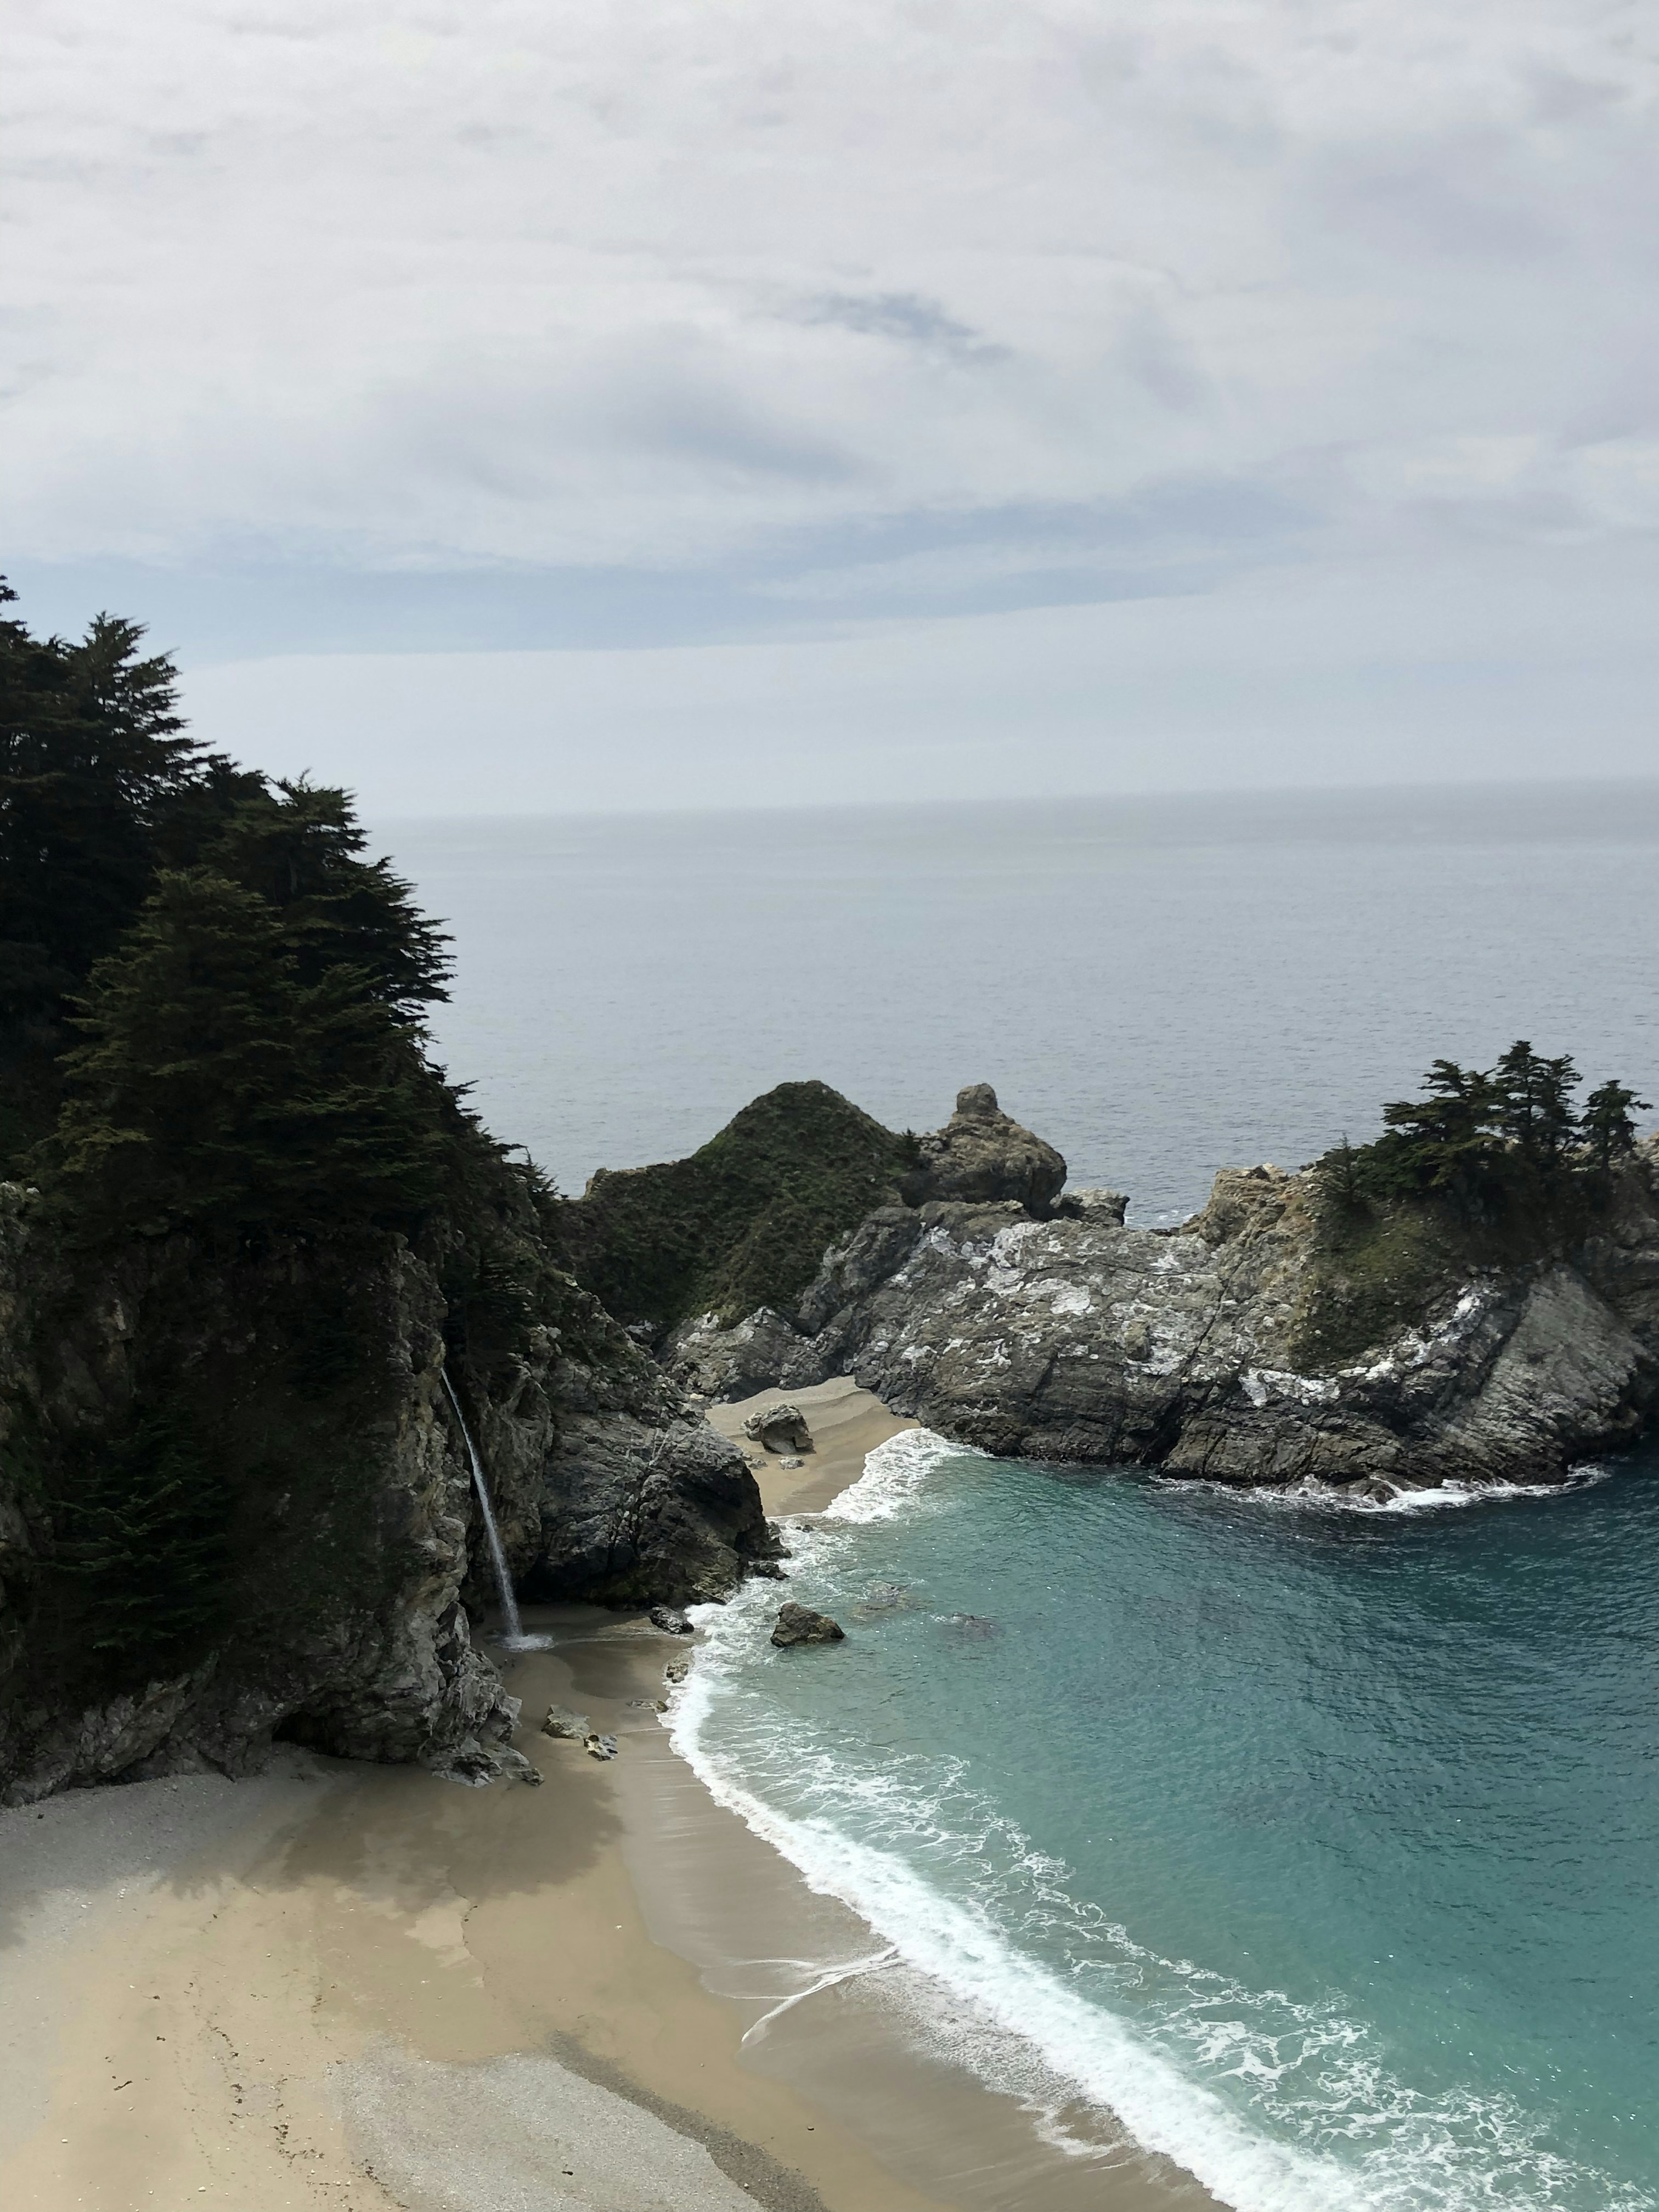 This photo was taken originally by me, while I was on spring break in Big Sur, California